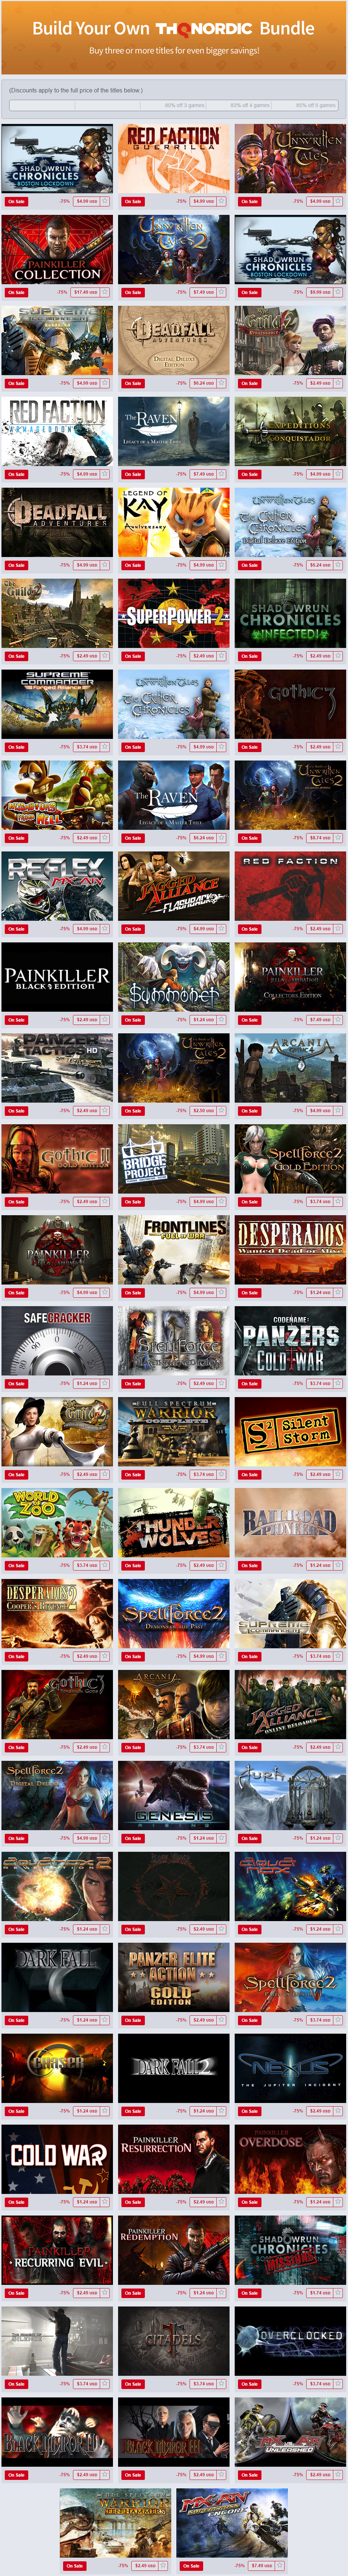 The Humble Store- Birthday Sale 2016 - THQ.png